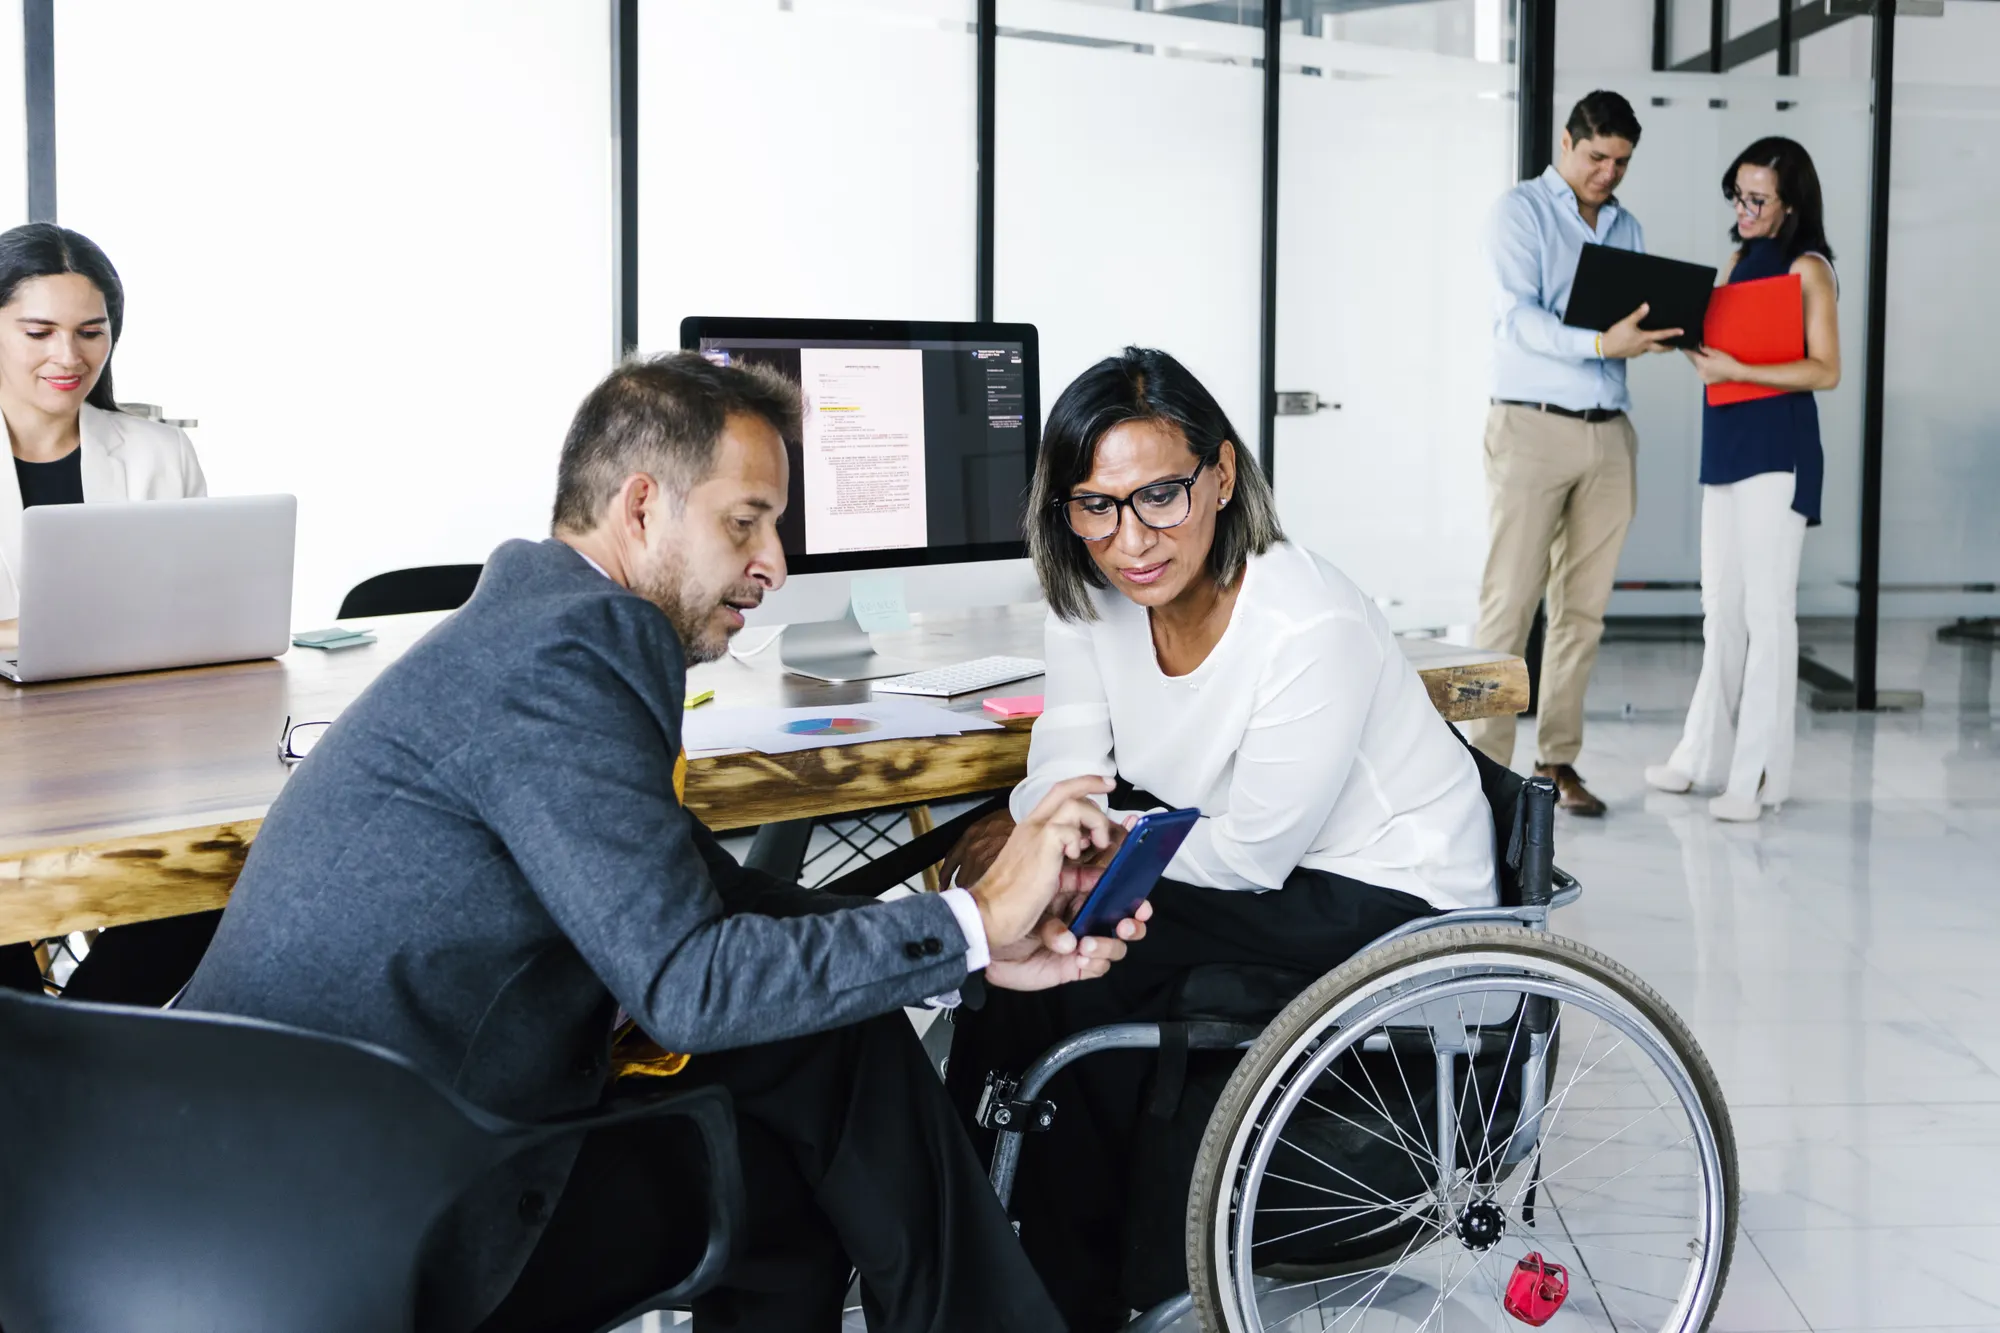 Latinx transgender businesswoman in wheelchair with office colleague checking email on smartphone and office employees working in the background.